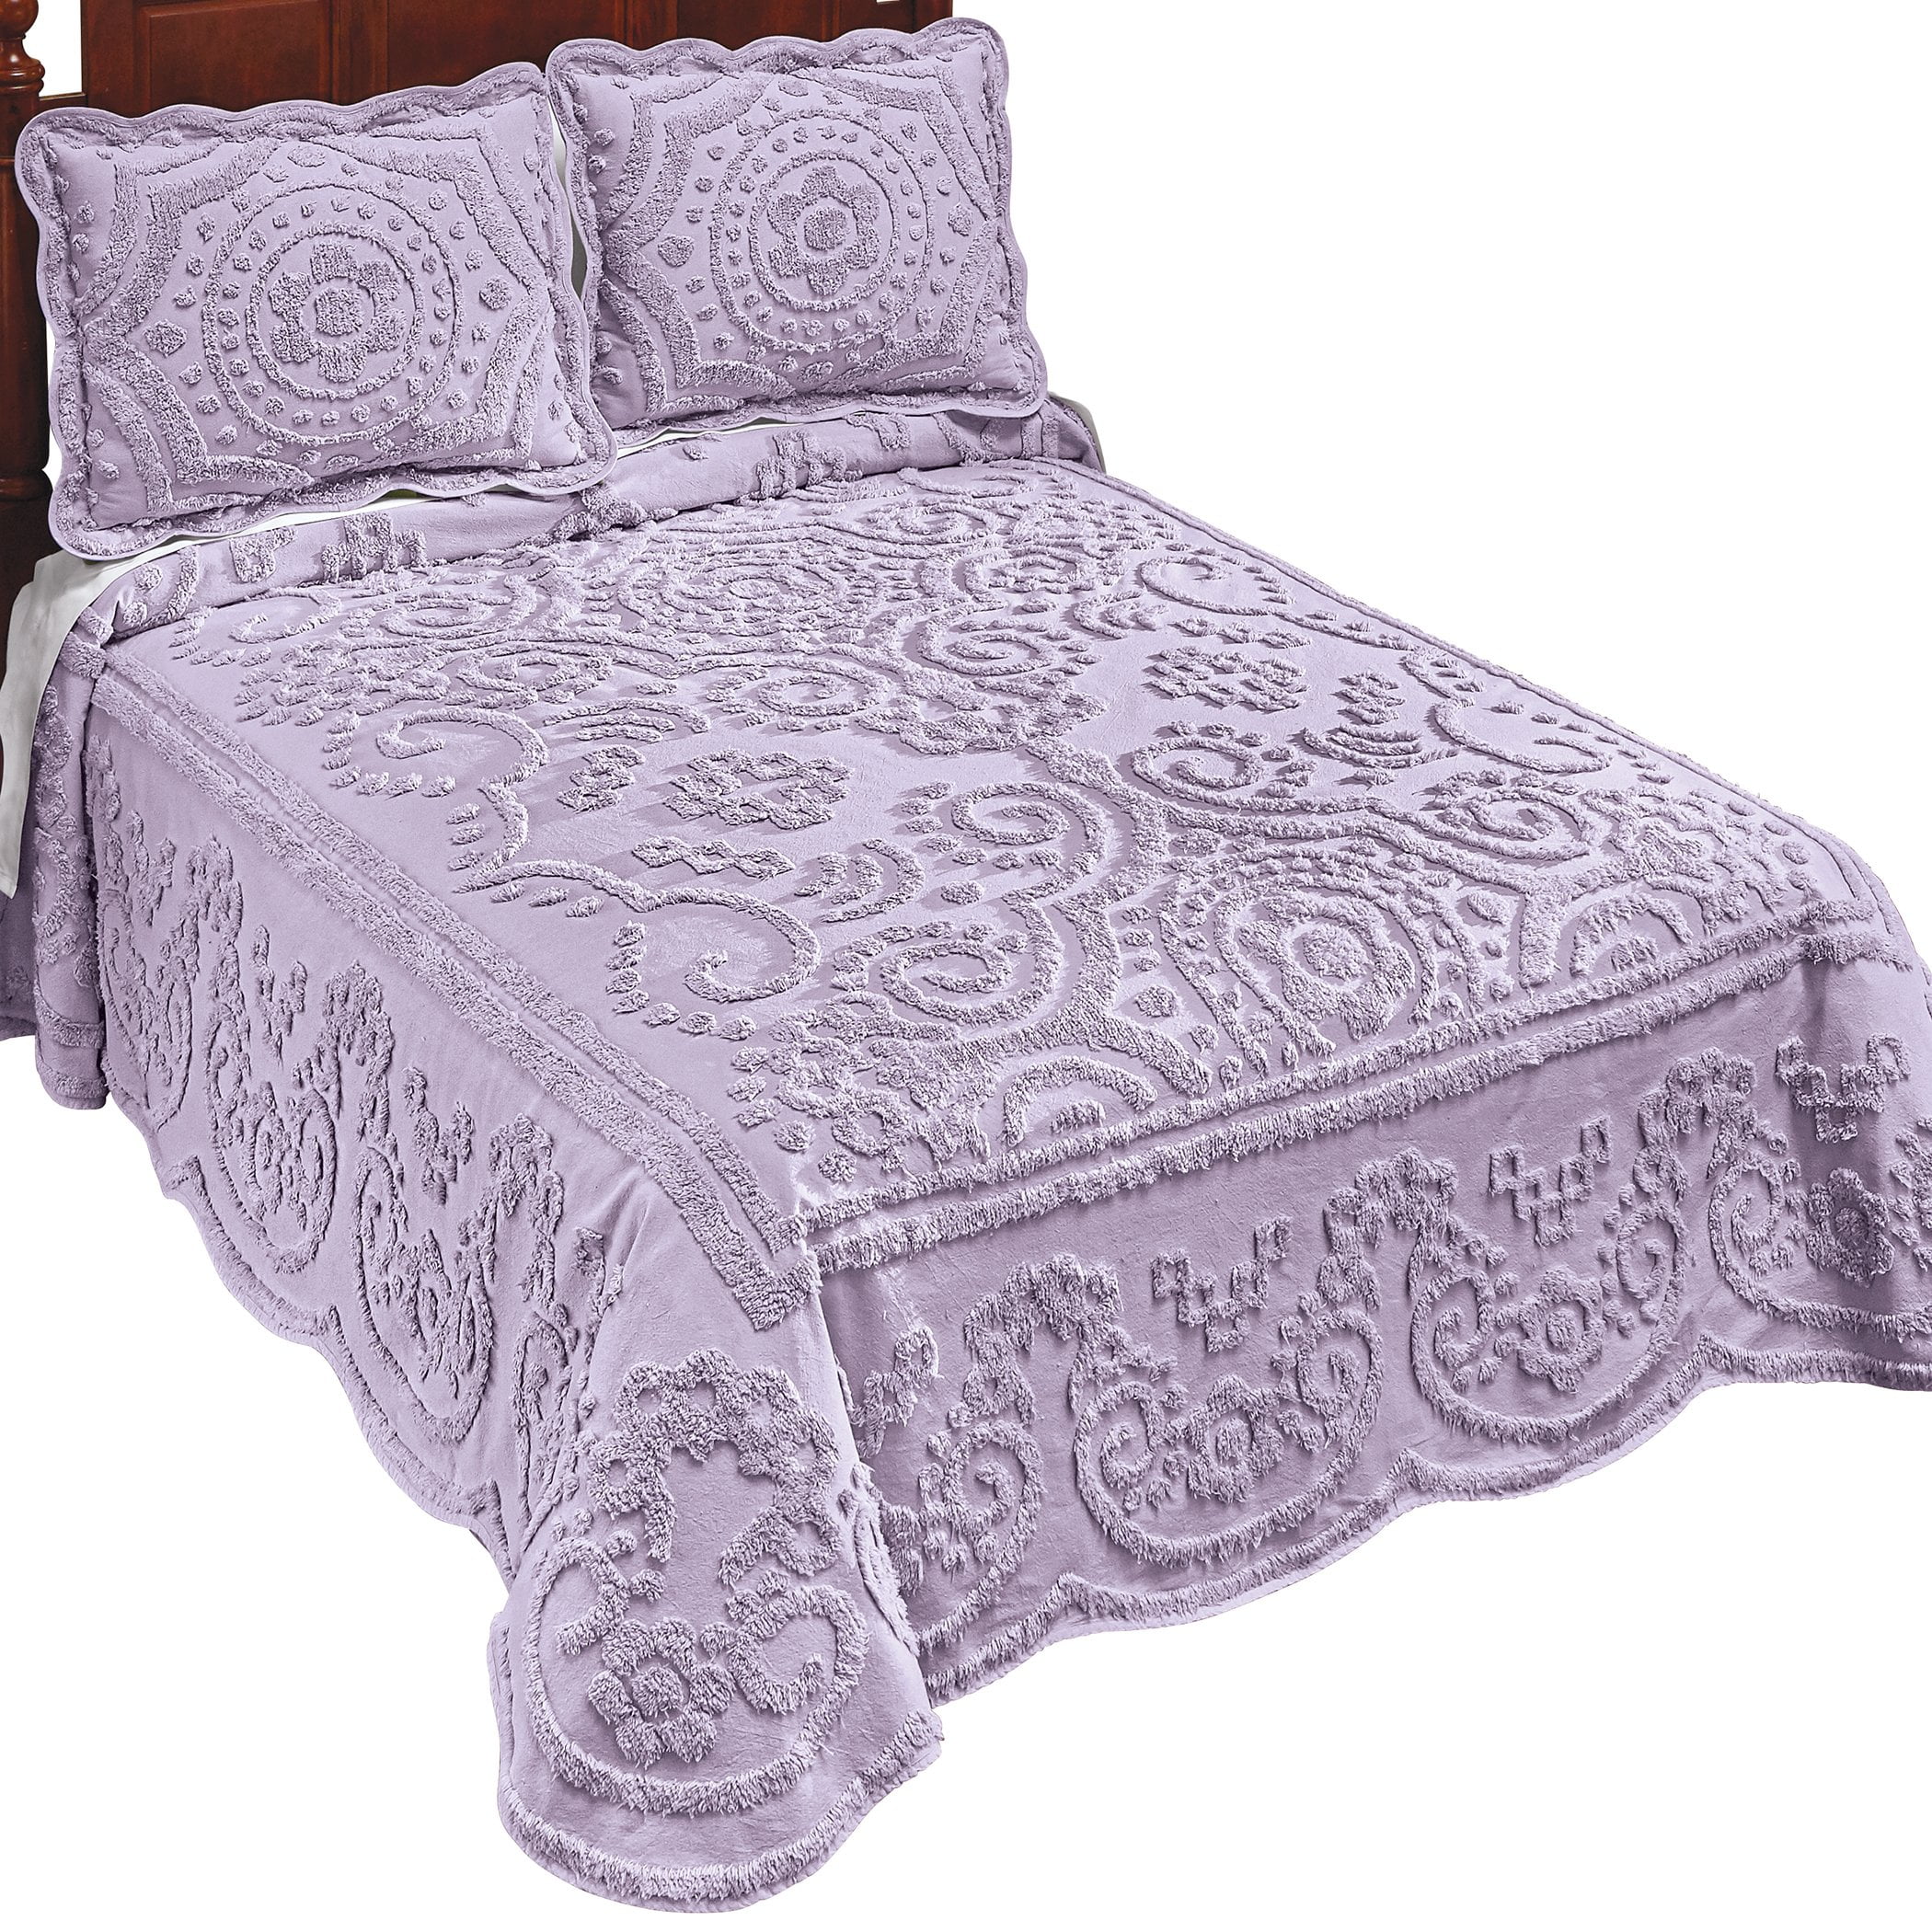 Details about   Scalloped Chenille Cotton Luxury Bedspread 